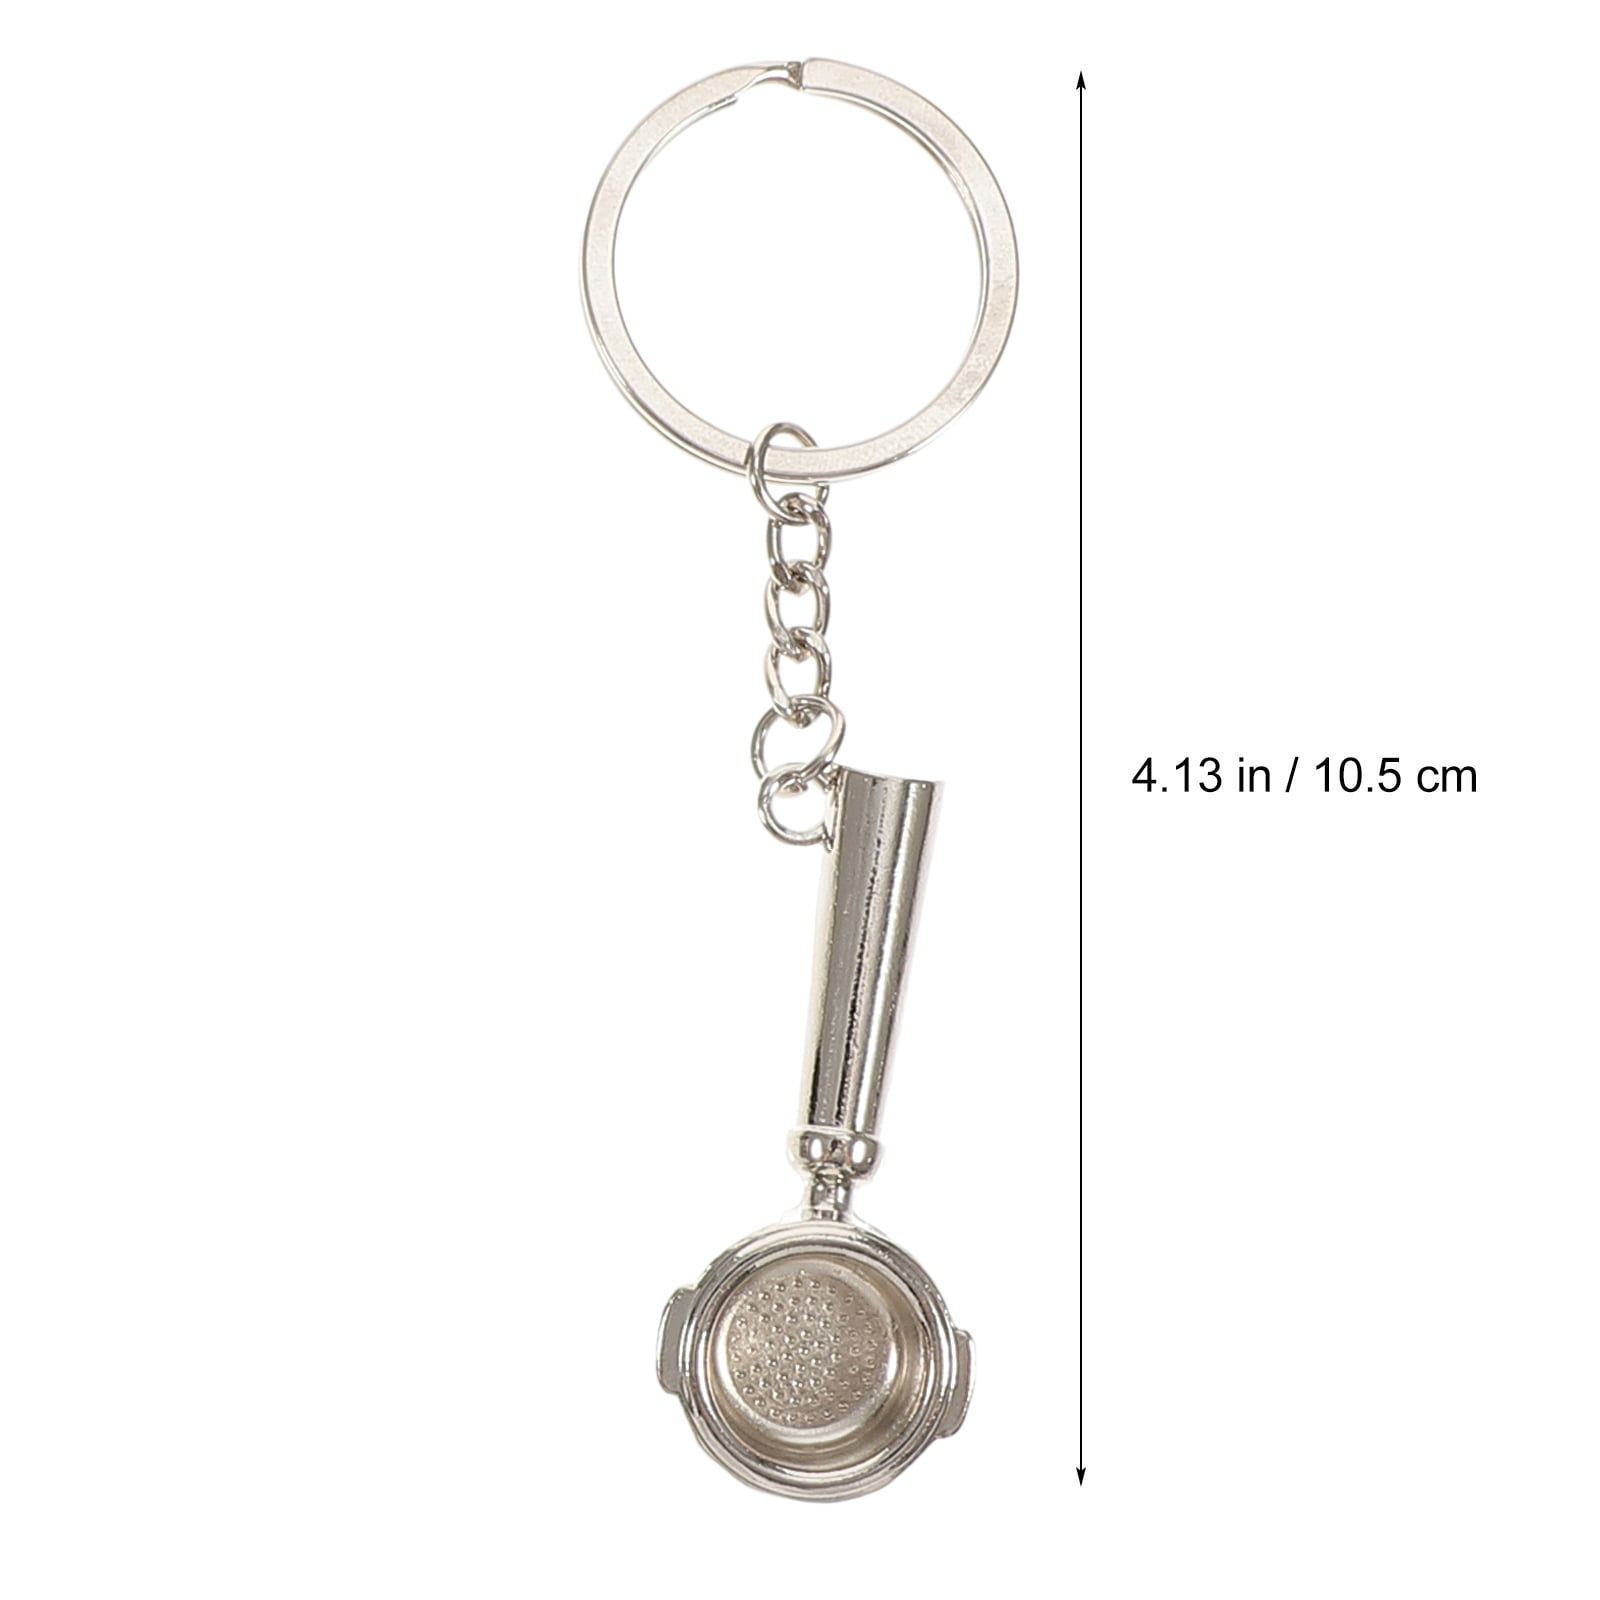 SHOWERORO 2pcs Mini Key Ring Creative Key Holder Mini Tool Keychains Key  Rings Father's Day Keychains Small Tools Wafer at  Women's Clothing  store